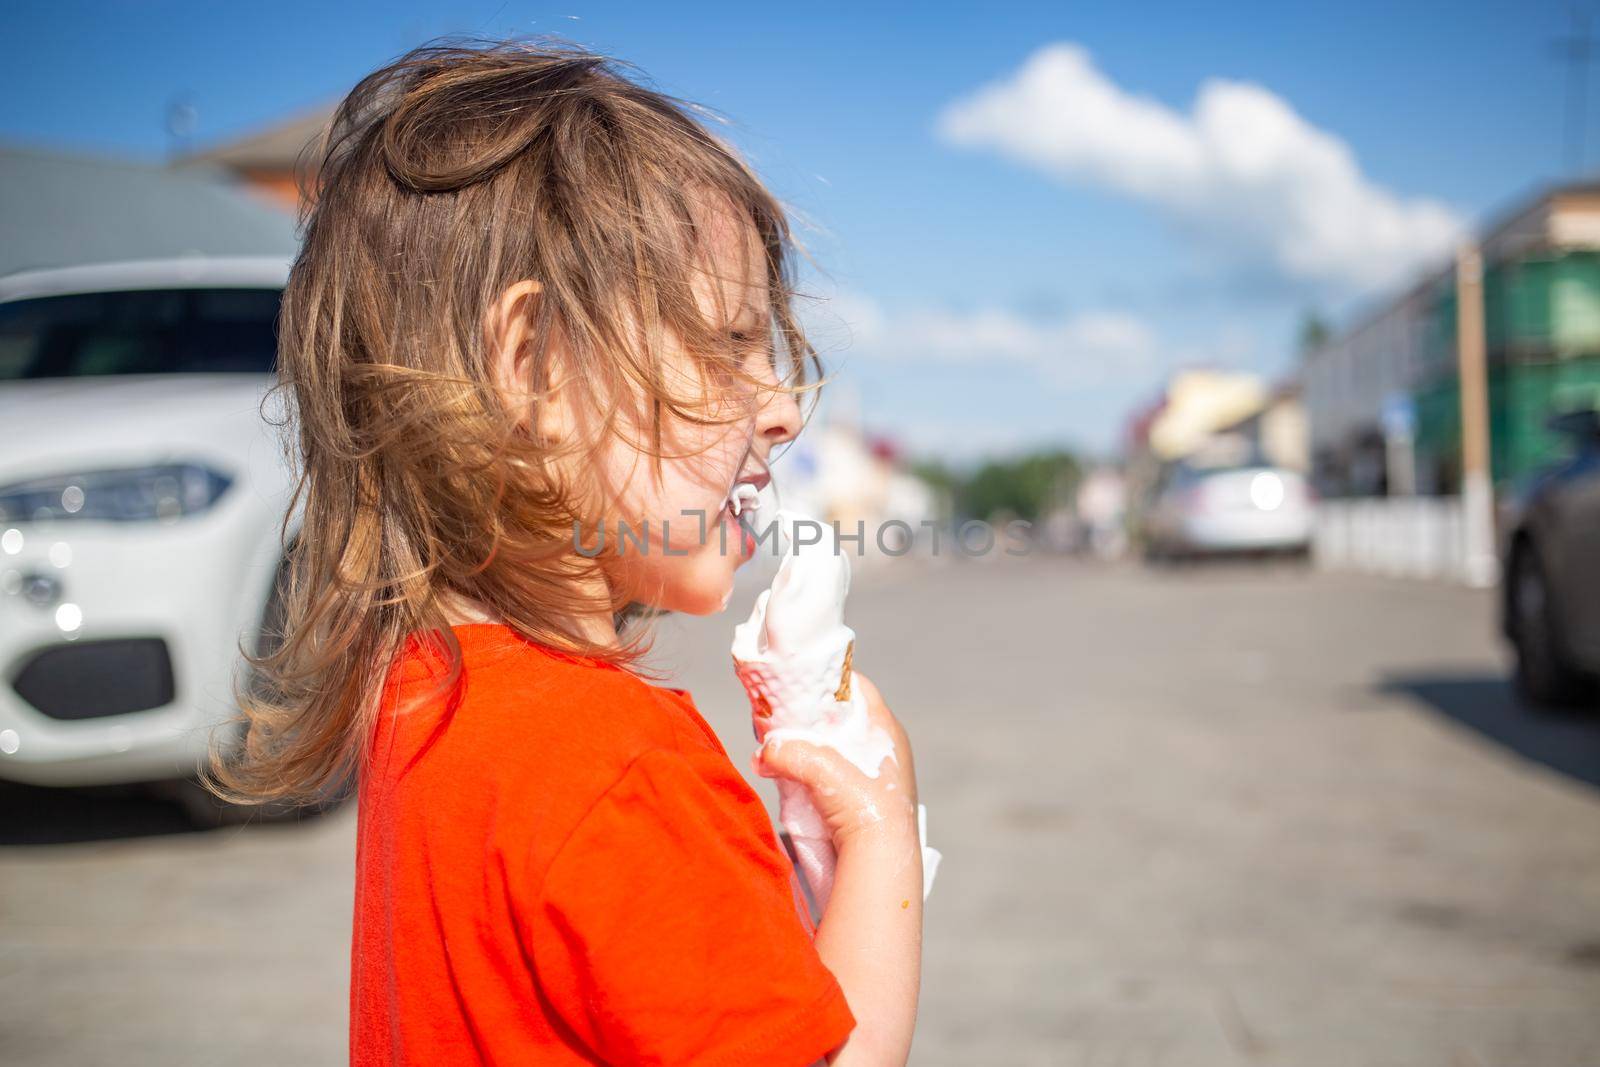 side portrait of little girl eating an ice cream cone on a hot day outside. ice cream melts and flows